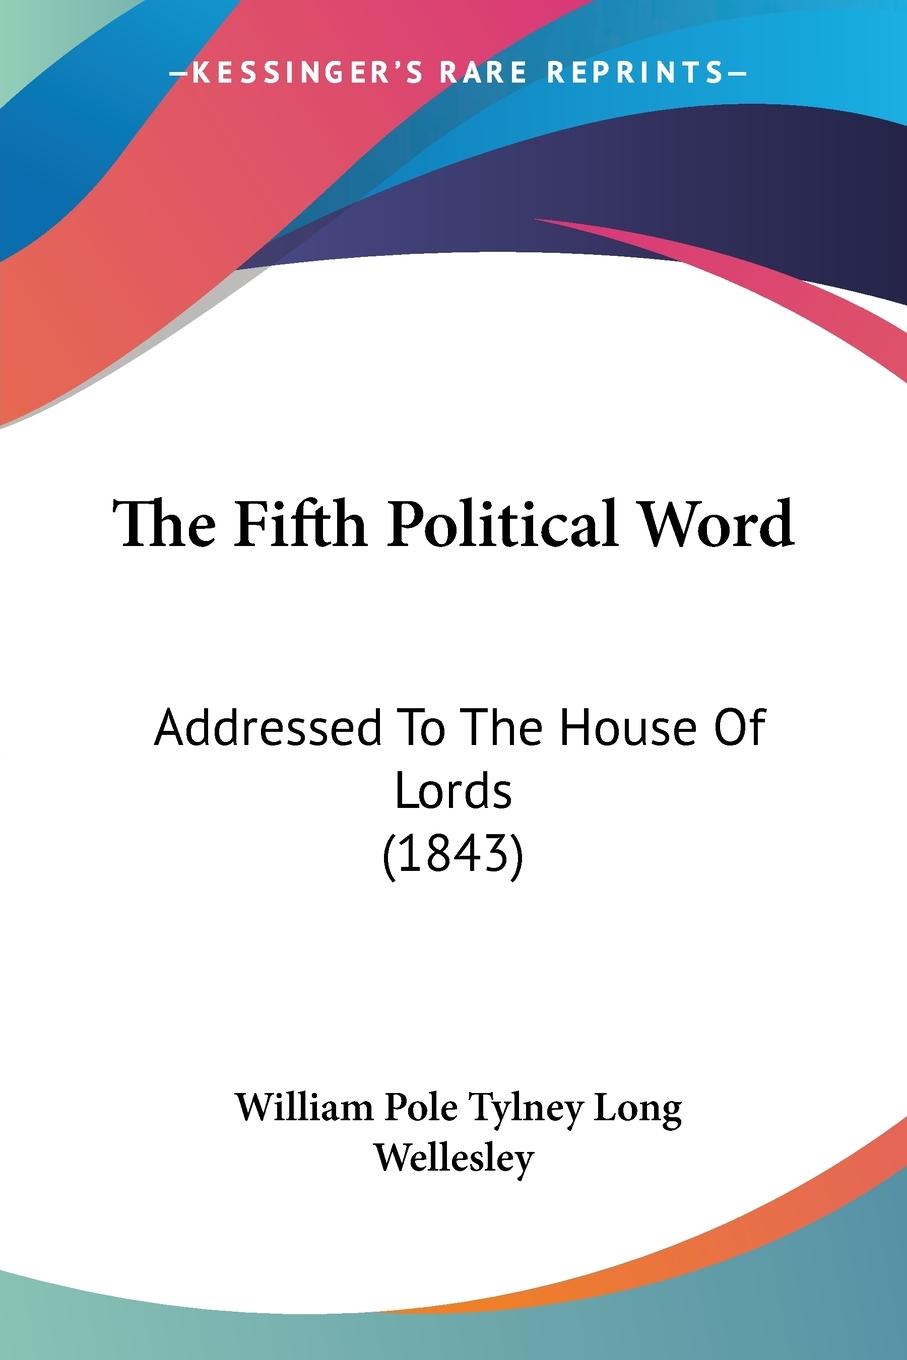 The Fifth Political Word - Wellesley, William Pole Tylney Long